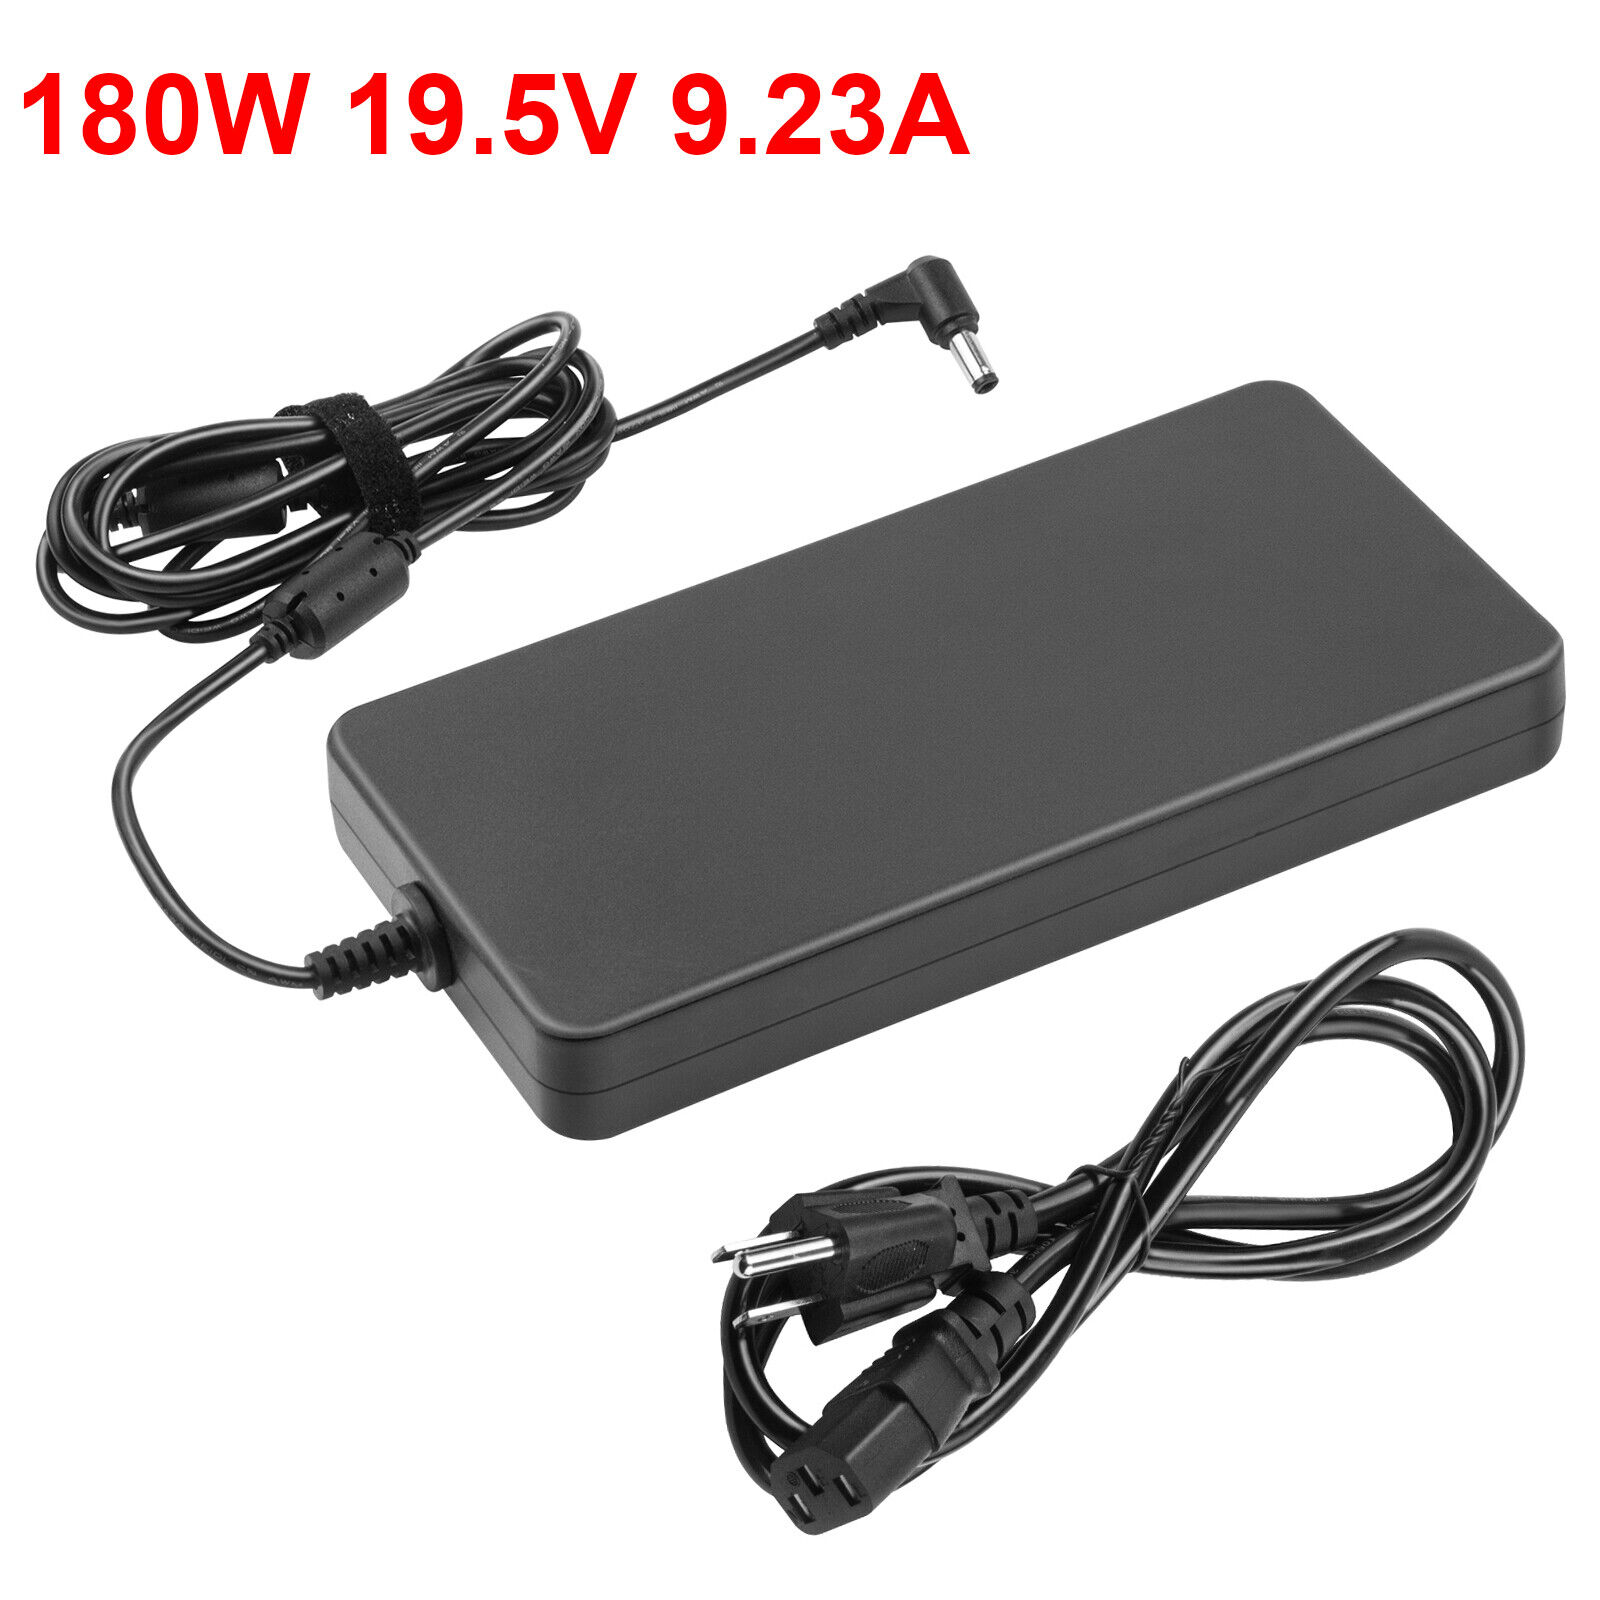 19V 45W/120W/180W Ac Power Adapter Laptop Charger for Asus ROG VivoBook MSI